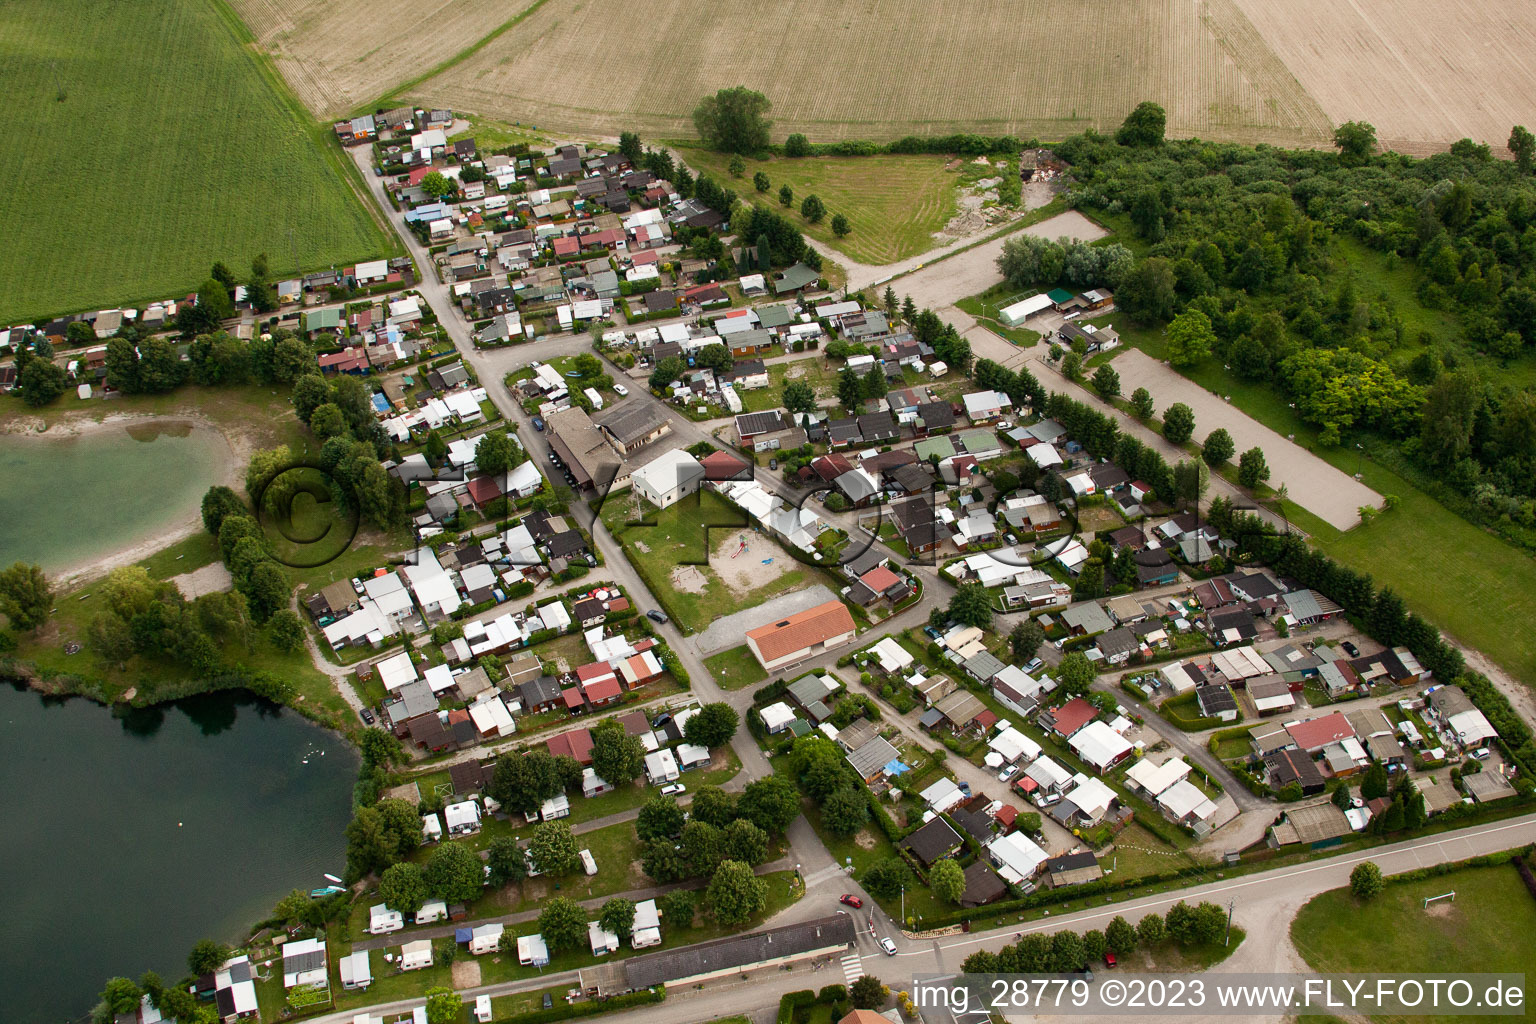 Camping Les Peupliers in Beinheim in the state Bas-Rhin, France